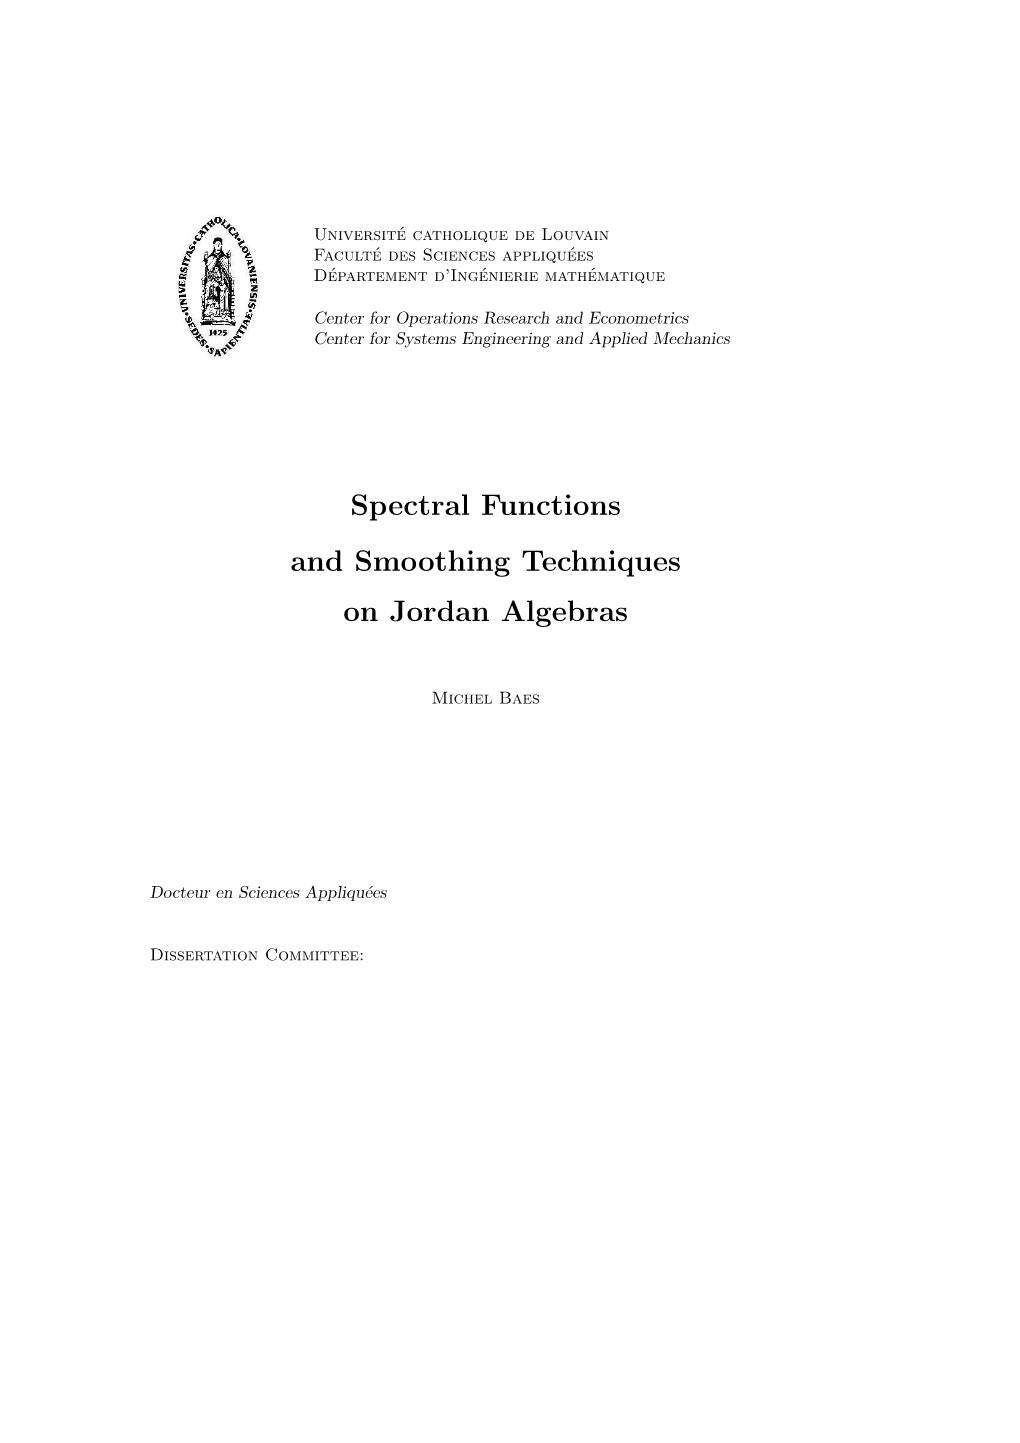 Spectral Functions and Smoothing Techniques on Jordan Algebras